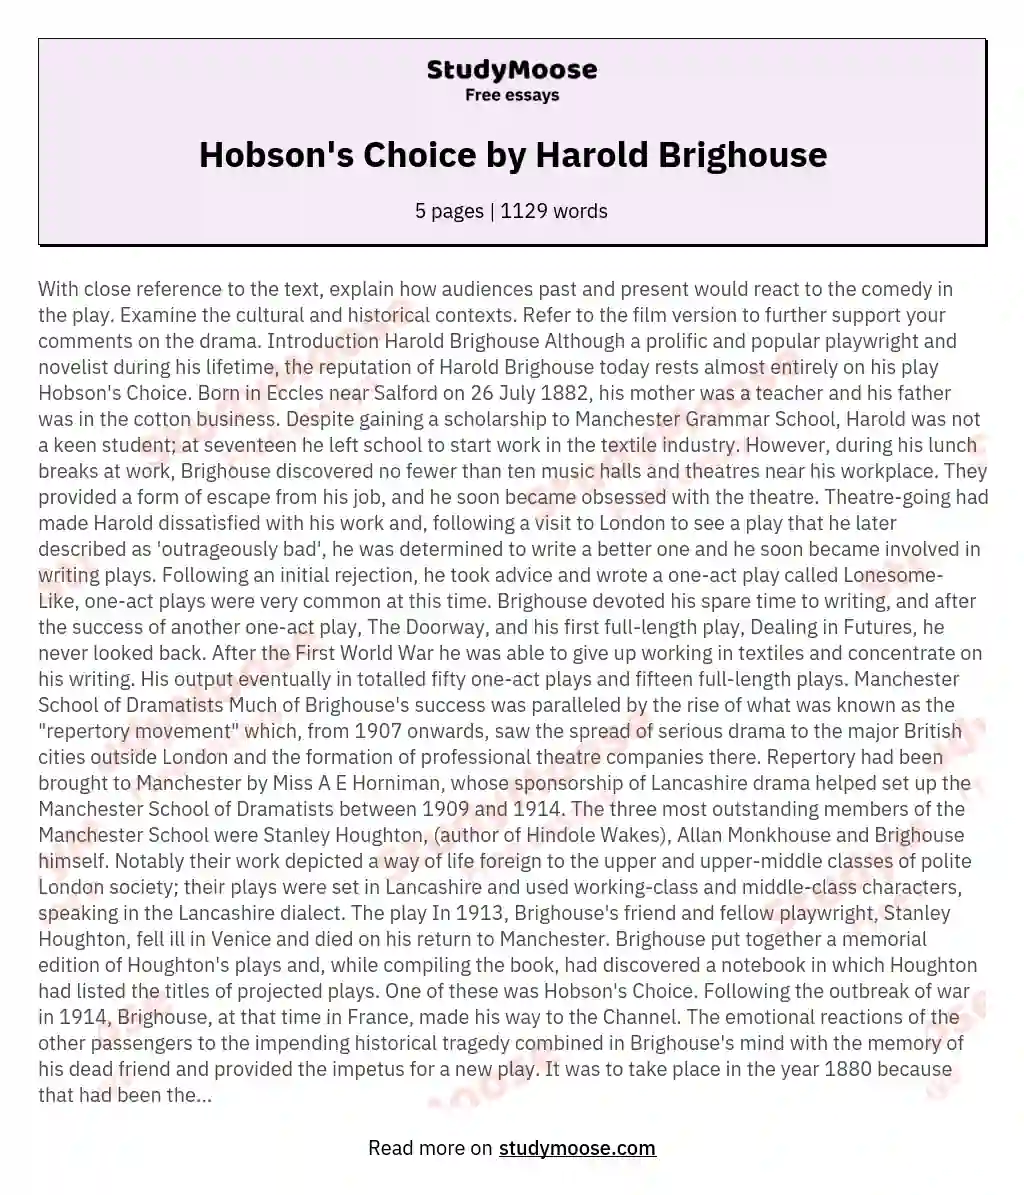 Hobson's Choice by Harold Brighouse essay